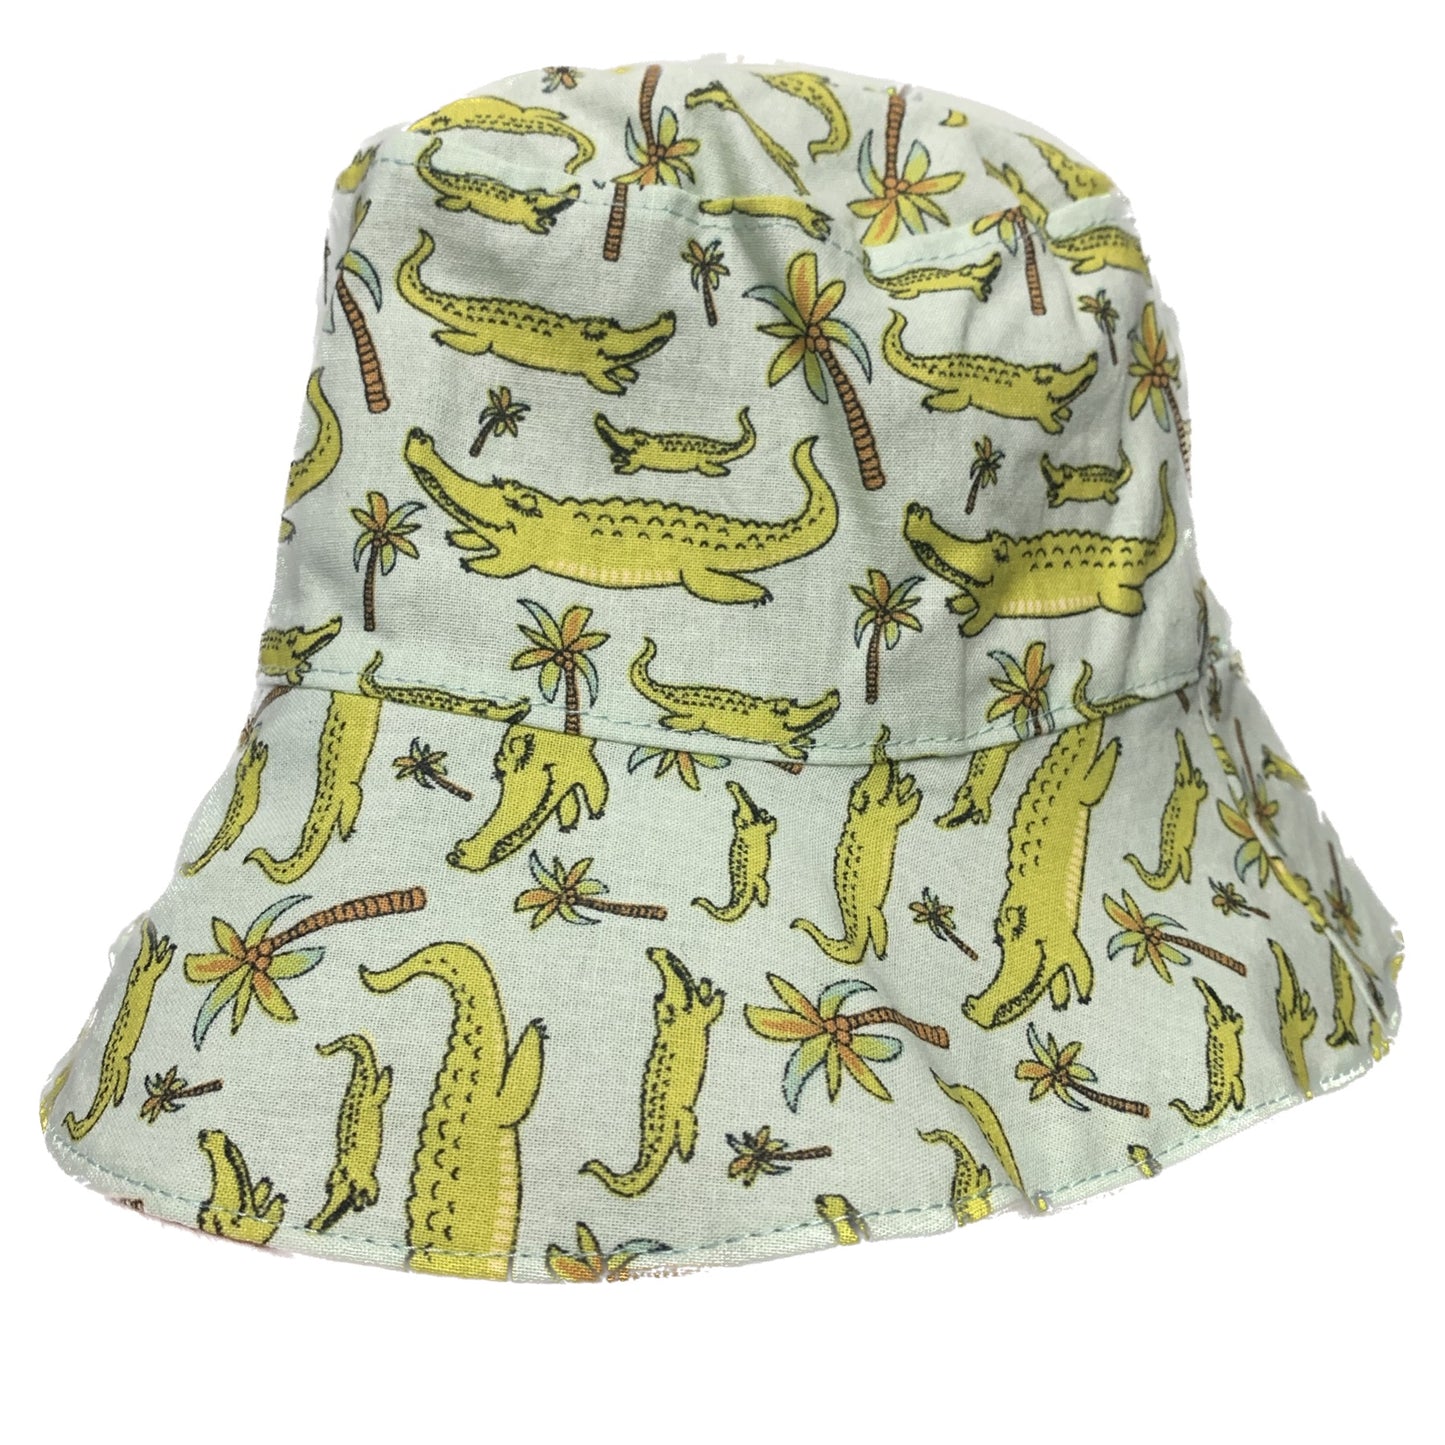 Teacups n Quilts- Crocodile Fabric Hat- Kids Size Small